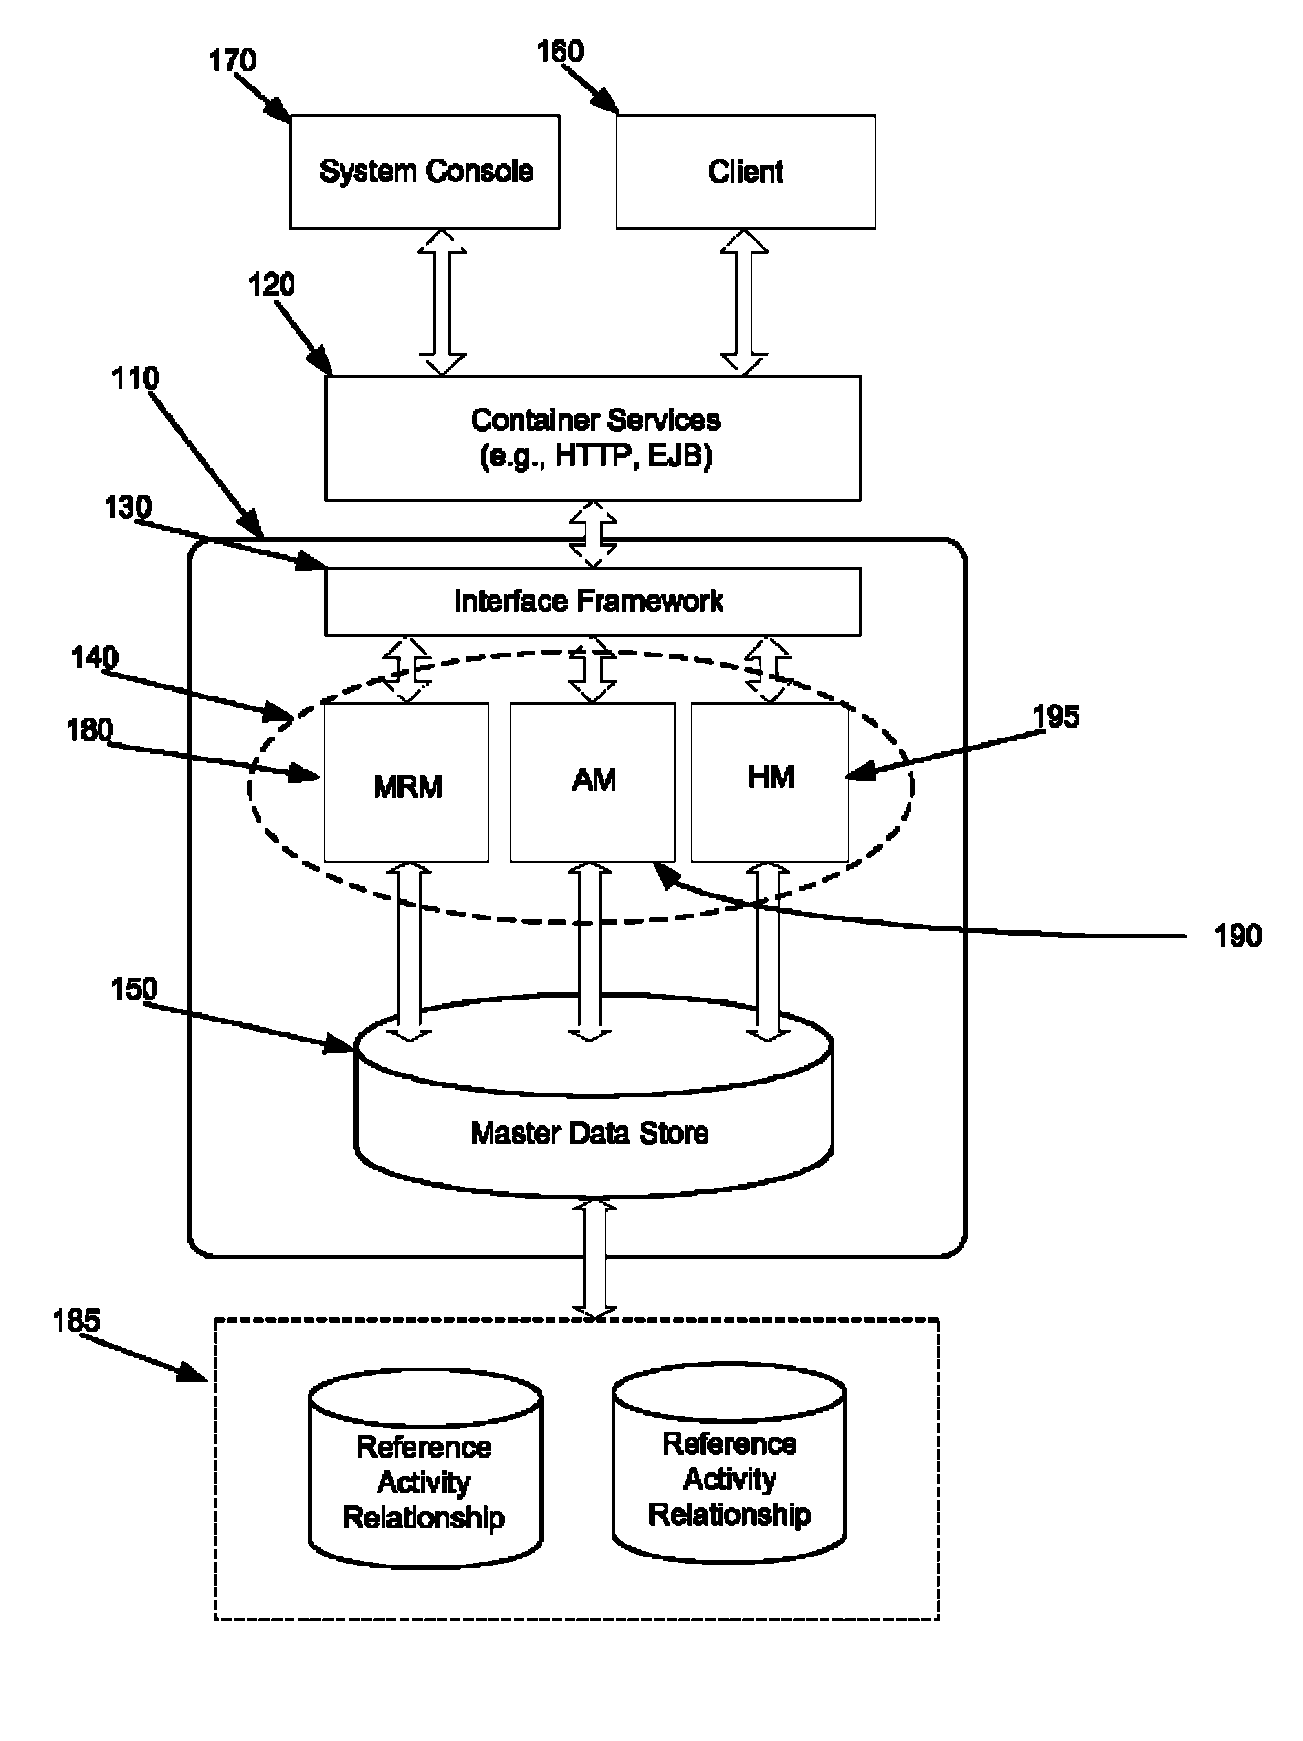 System and method for flexible security access management in an enterprise